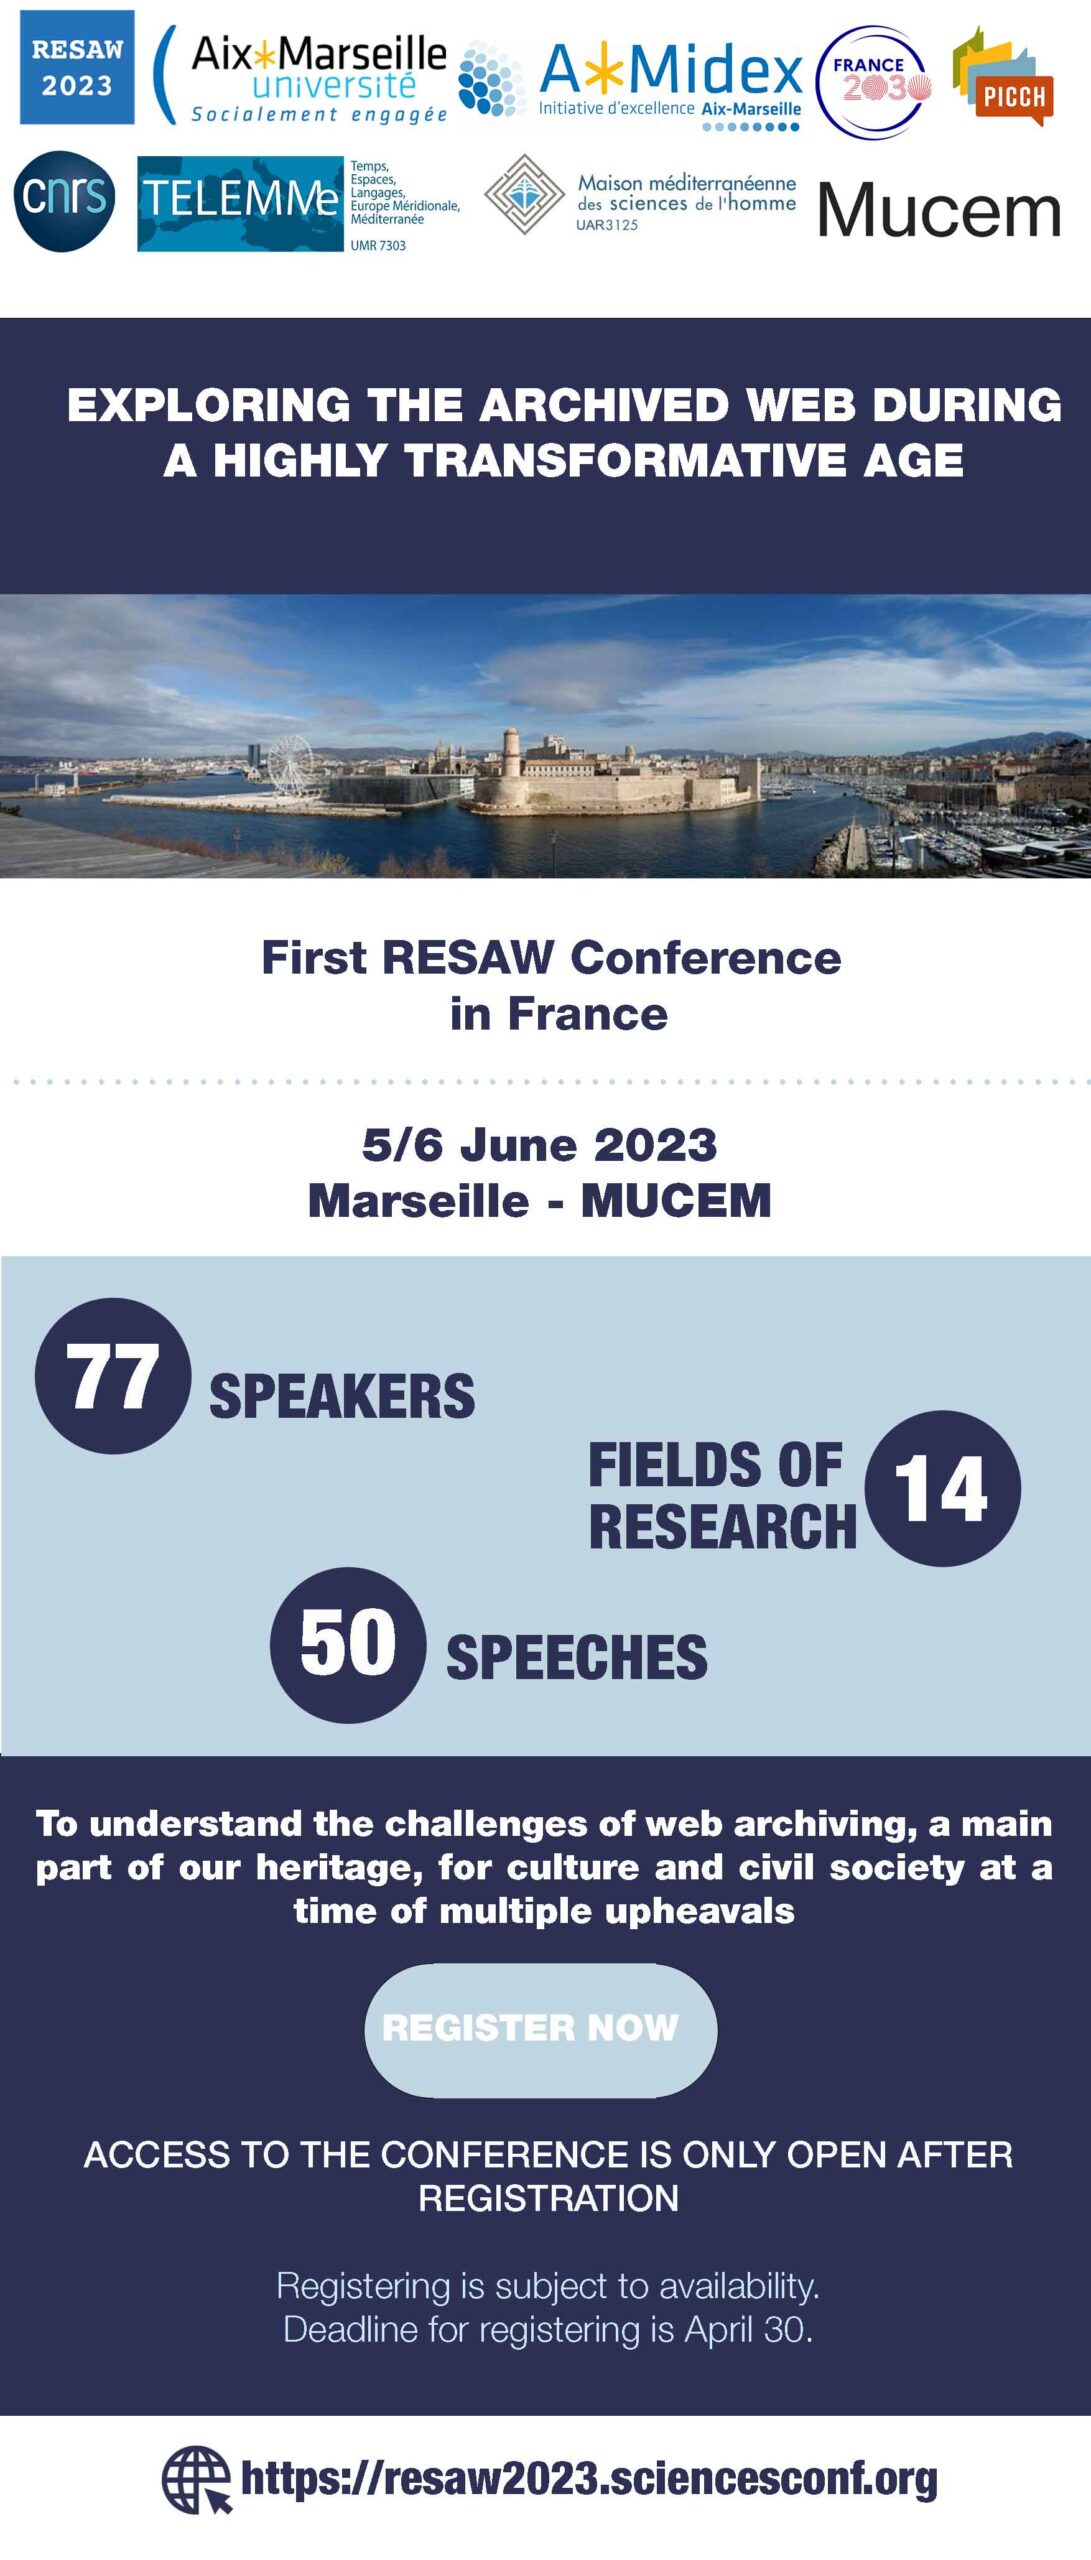 resaw_infographic